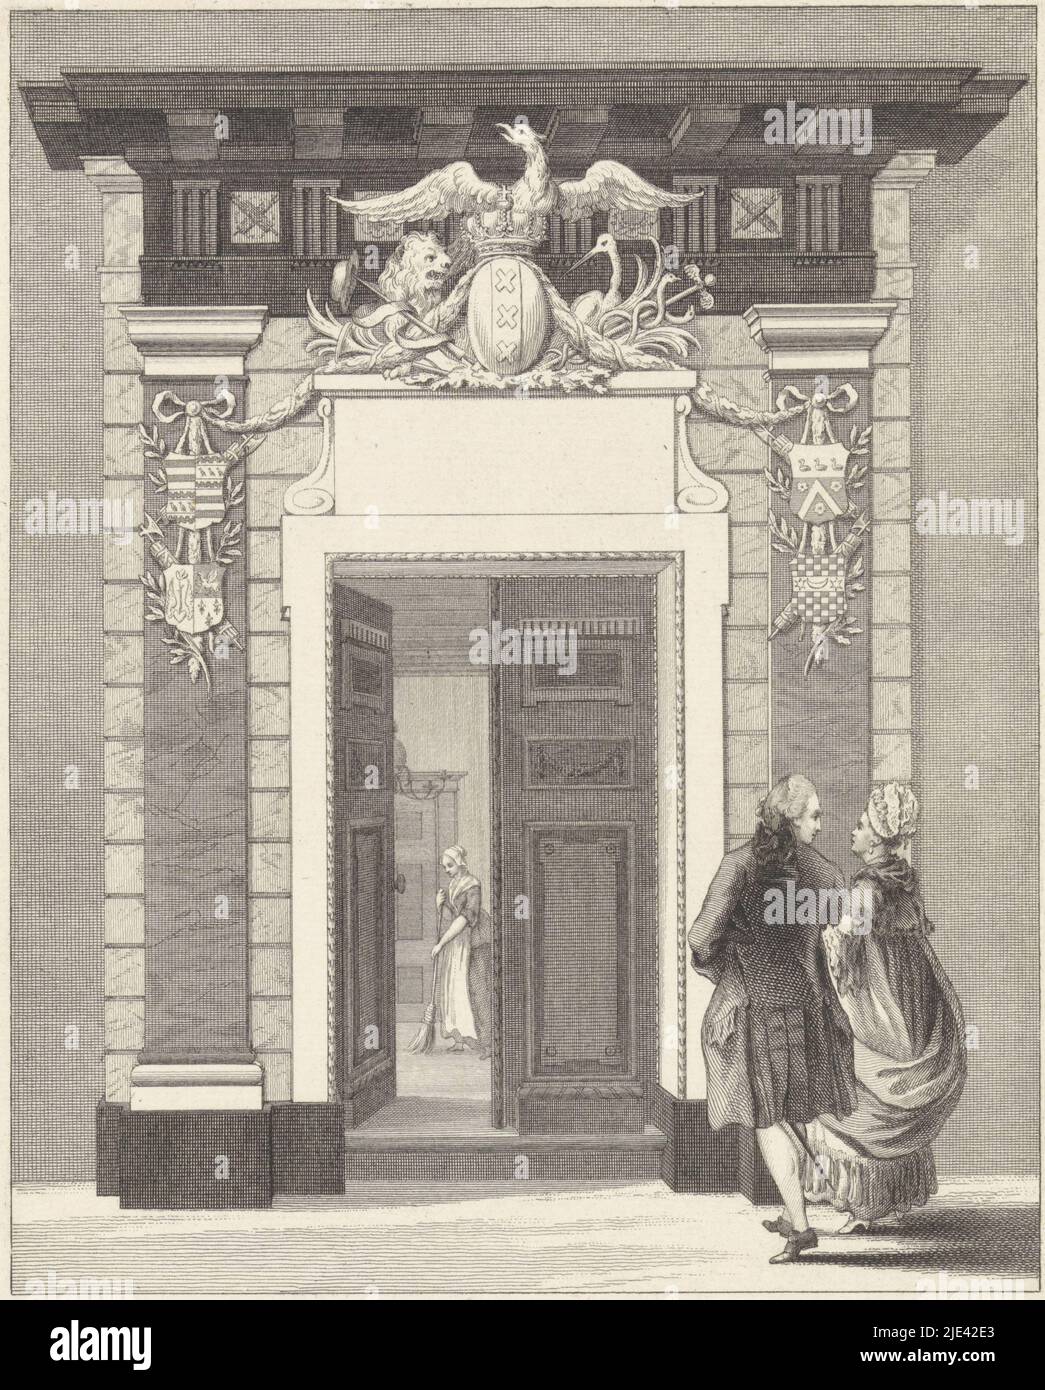 Corvershof, Harmanus Vinkeles, after Jacob Otten Huslij, 1773, Couple at a door. In the interior, a maid is visible sweeping the floor. Possibly the Corvershof in Amsterdam., print maker: Harmanus Vinkeles, Jacob Otten Huslij, Amsterdam, 1773, paper, etching, h 233 mm × w 160 mm Stock Photo